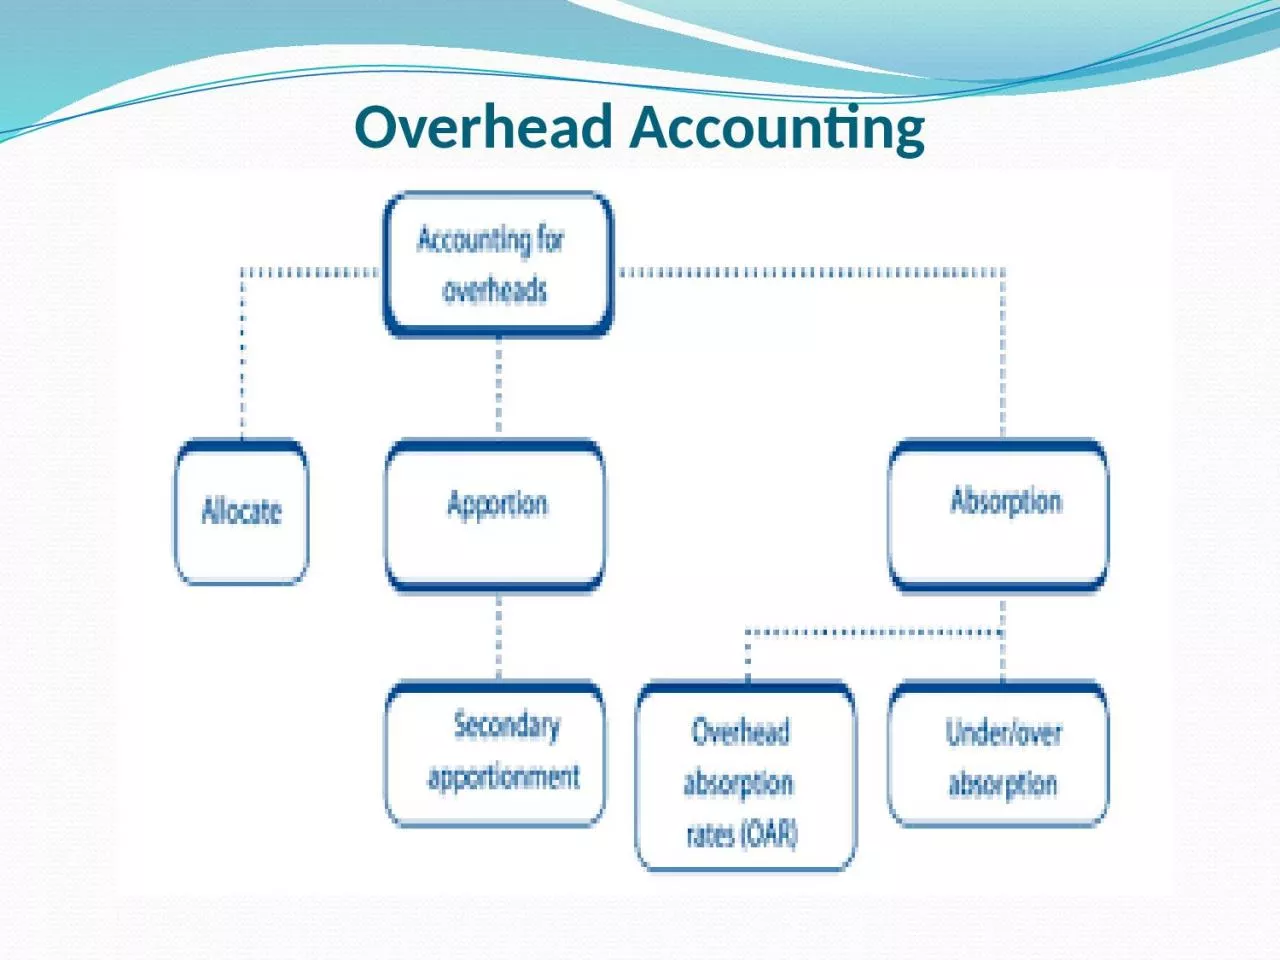 Overhead Accounting Allocation & Apportionment of Overheads